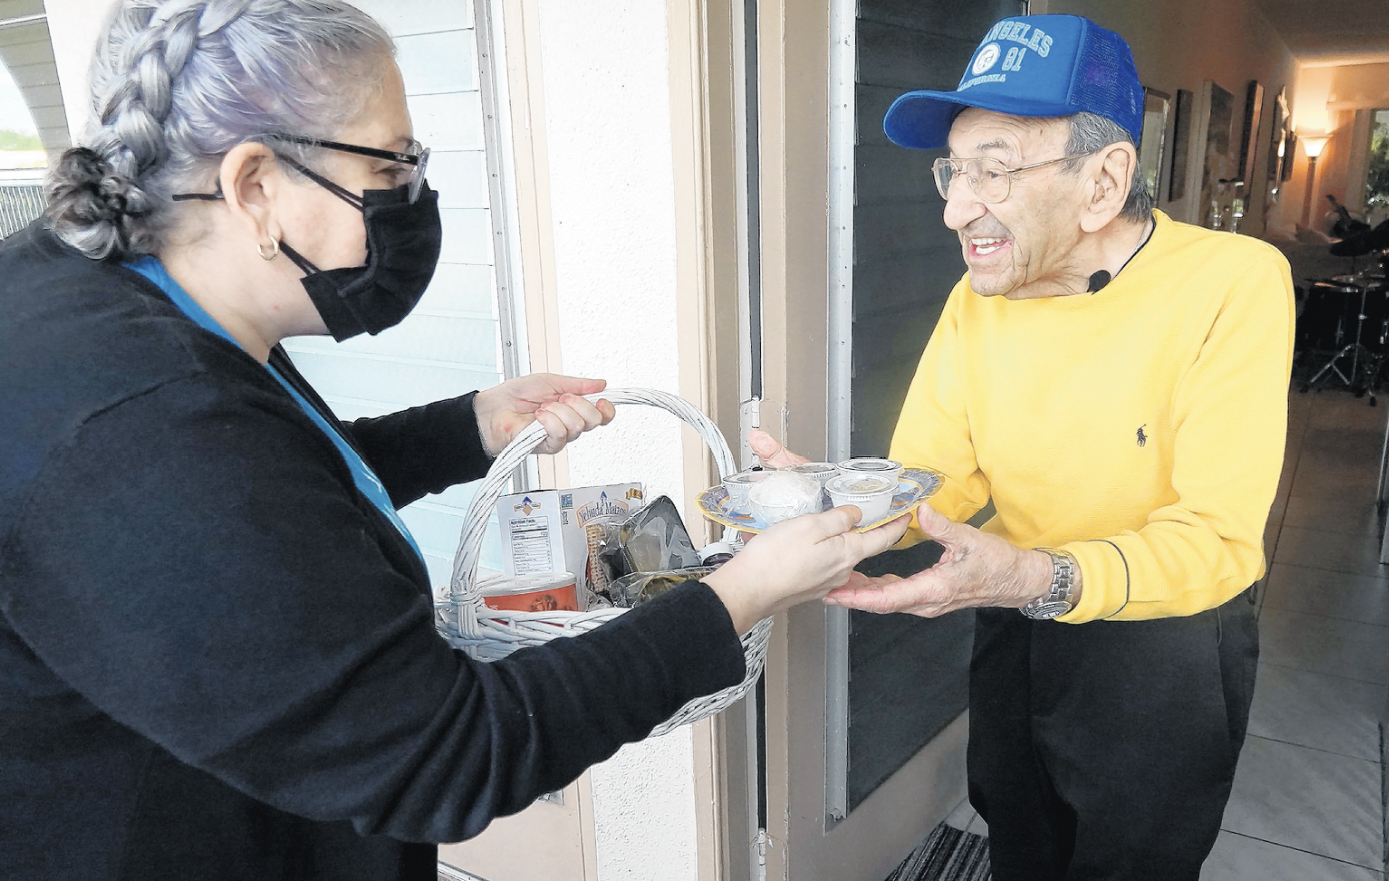 Passover food deliveries make a ‘big difference’ for area seniors